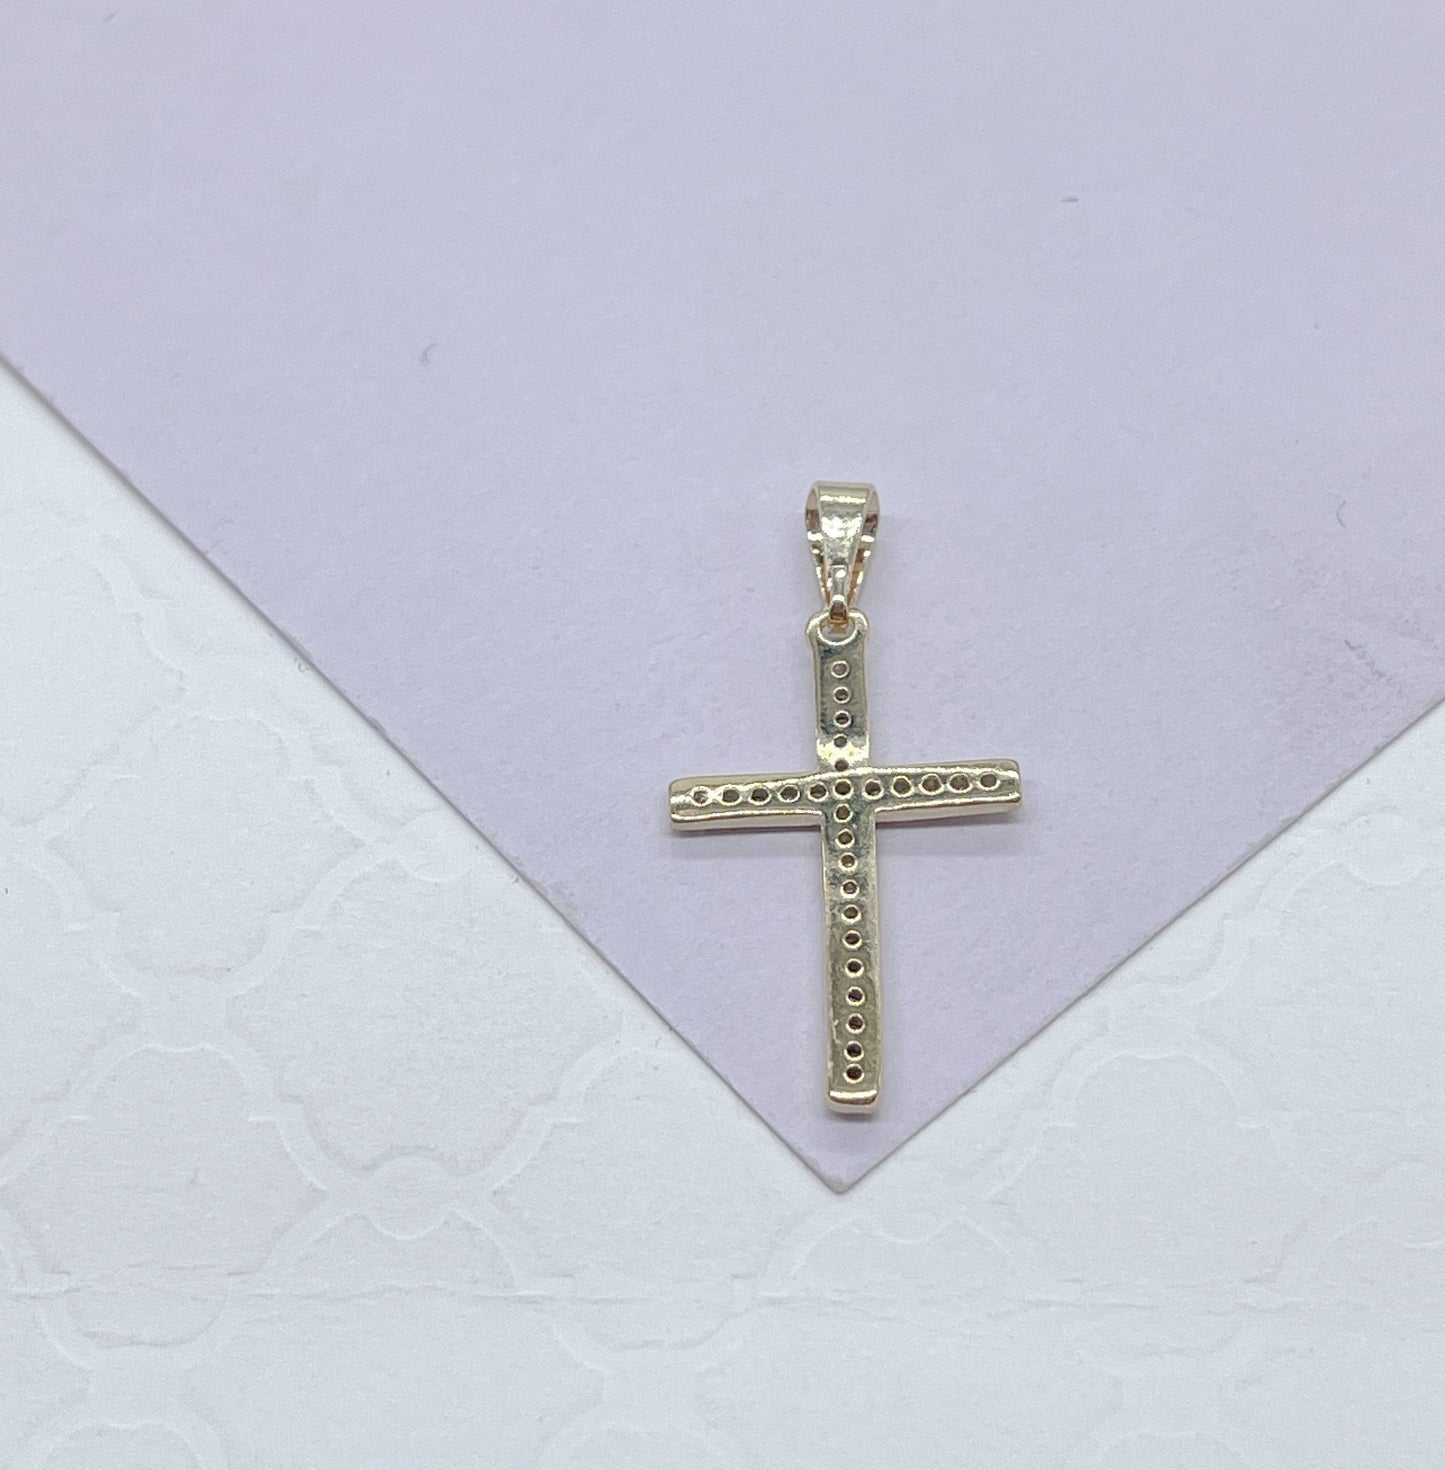 18k Gold Filled 2 Inch Tall Dainty Cross With Micro CZ